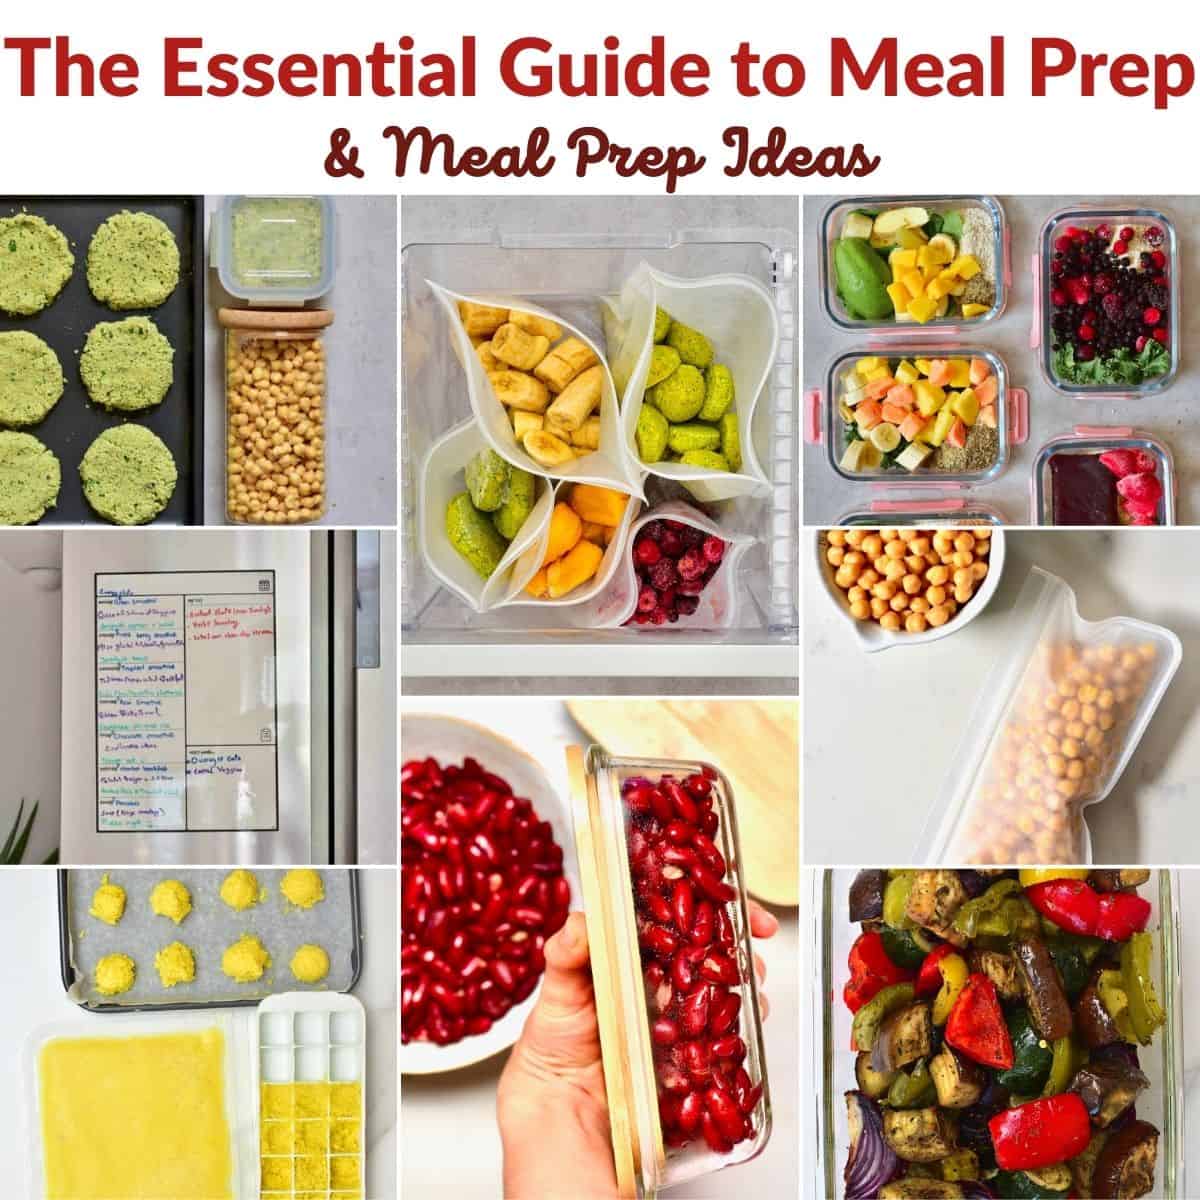 12 Meal Prep Tips from Professional Meal Preppers